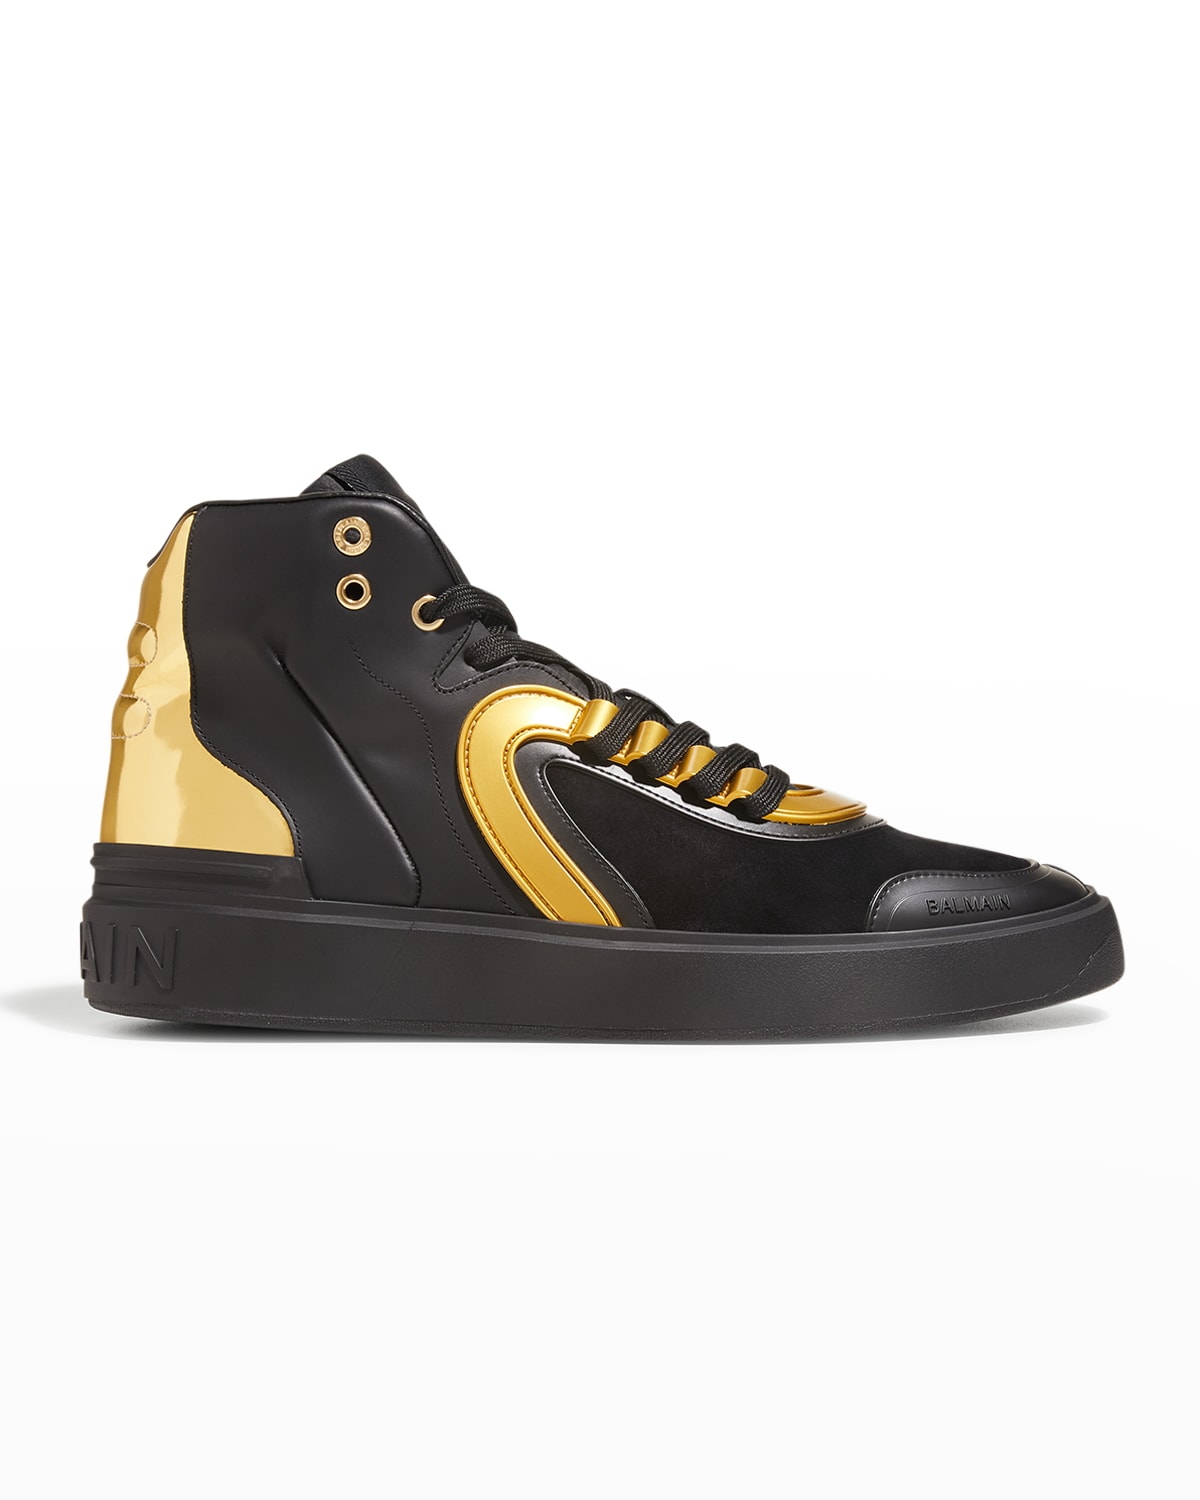 Versace Collection Black Pony Hair Patent Leather HI-Top Zip-Up Fashion Sneaker 